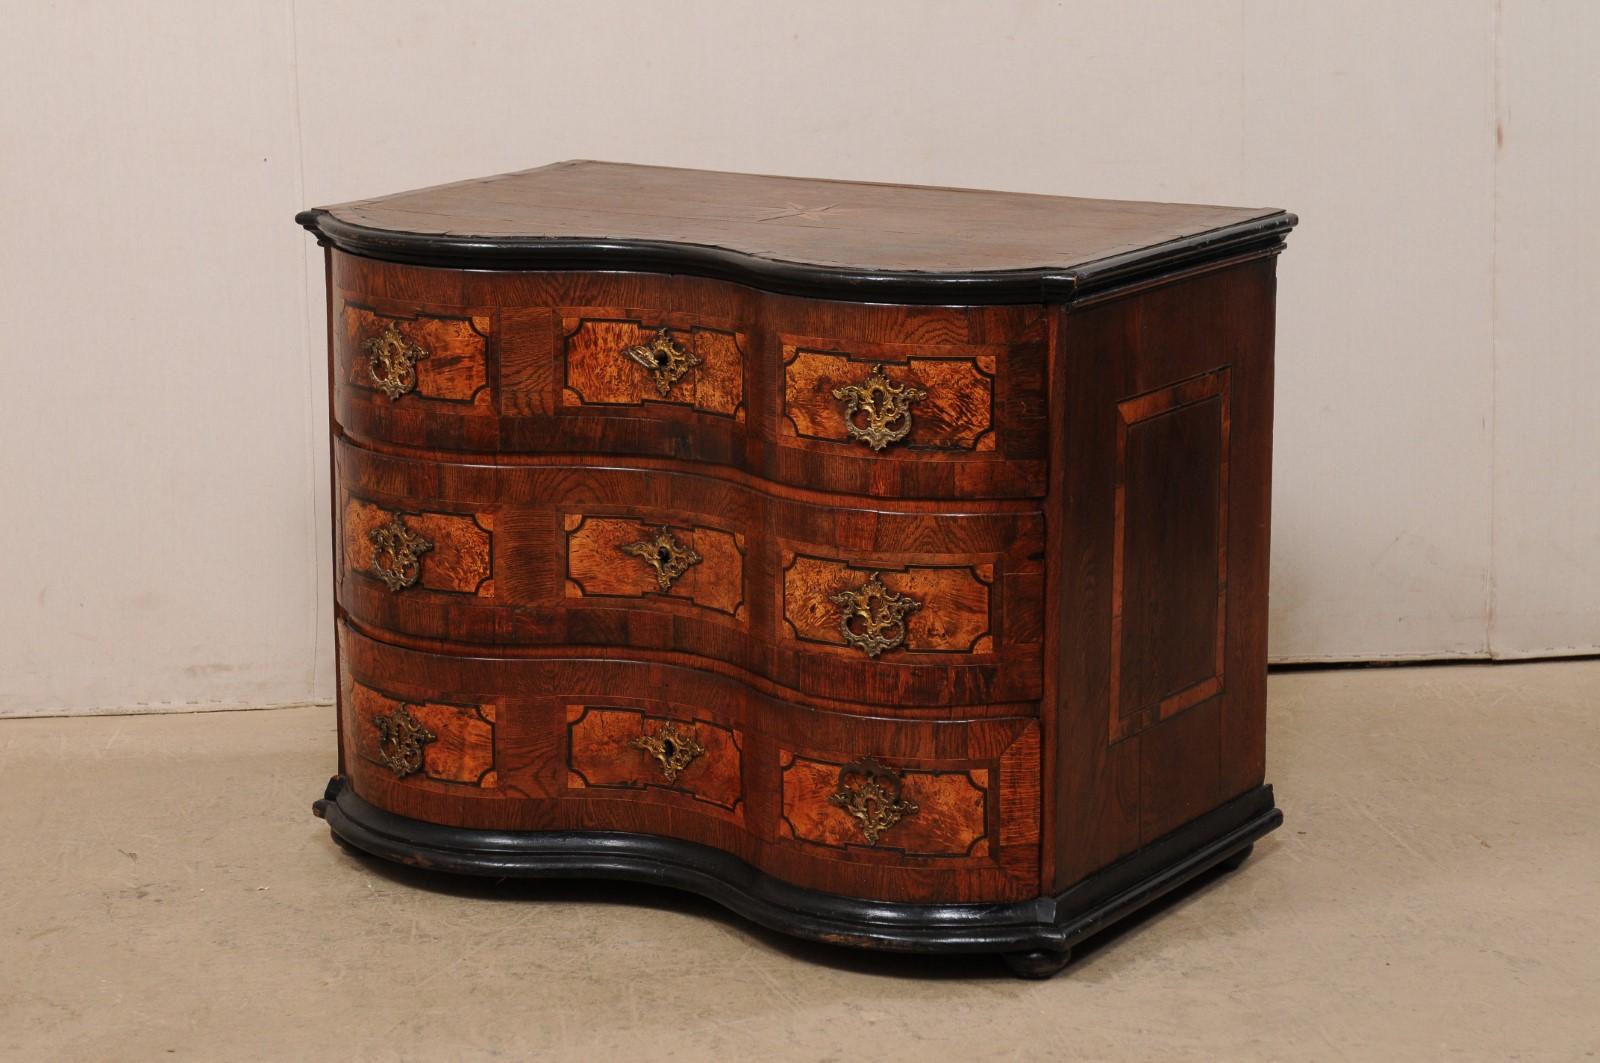 An Italian serpentine commode with exquisite marquetry and inlay designs from the 18th century. This antique chest from Italy, with curvy serpentine top and body, features a stunningly rhythmic design of marquetry and inlays adorning the drawer